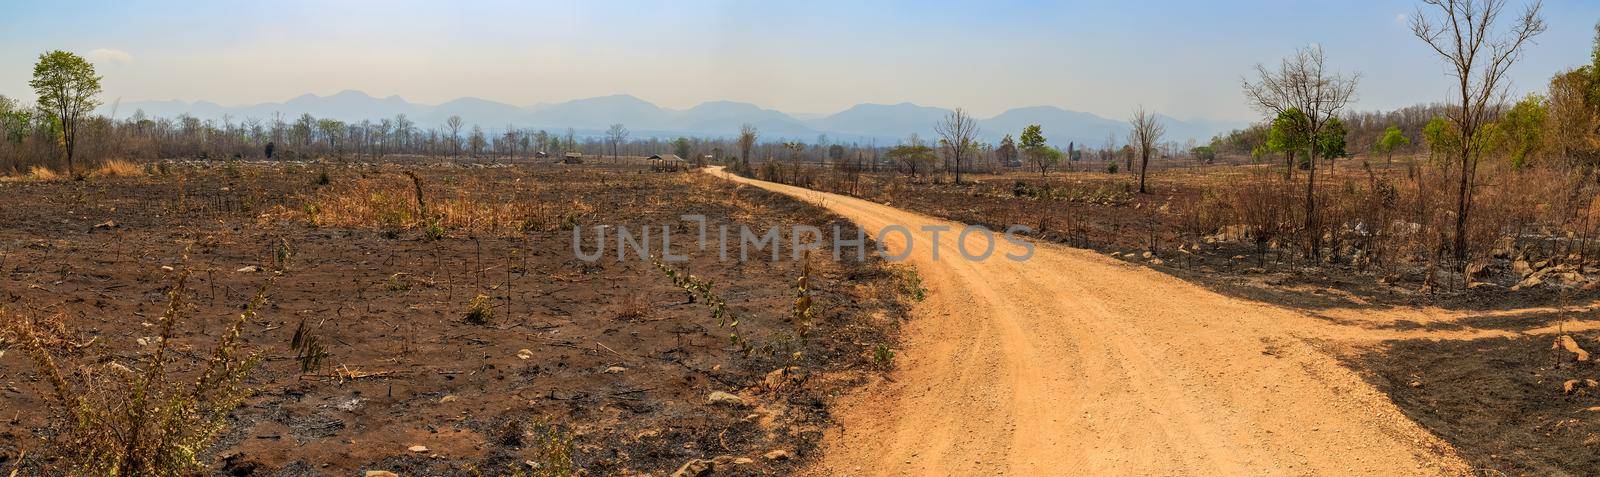 The destruction of forests for shifting cultivation in Thailand. by toa55